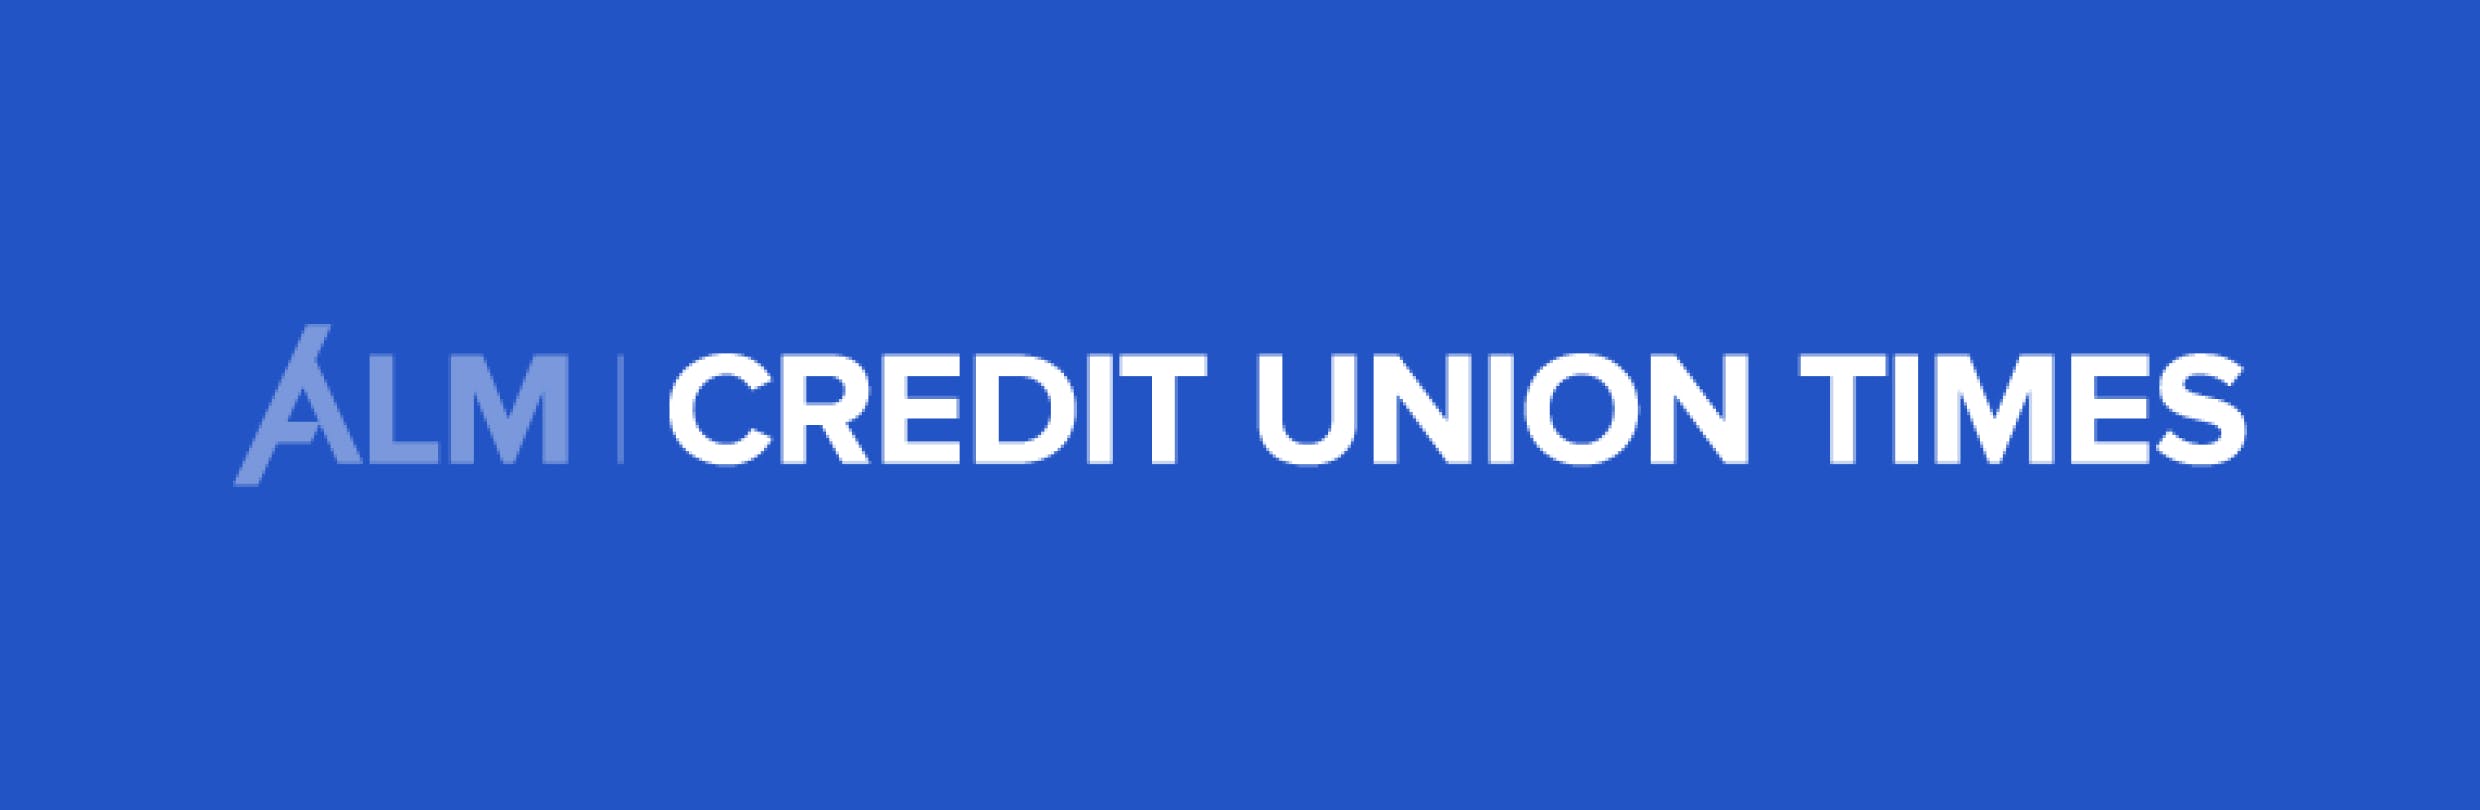 Credit Union Times logo banner